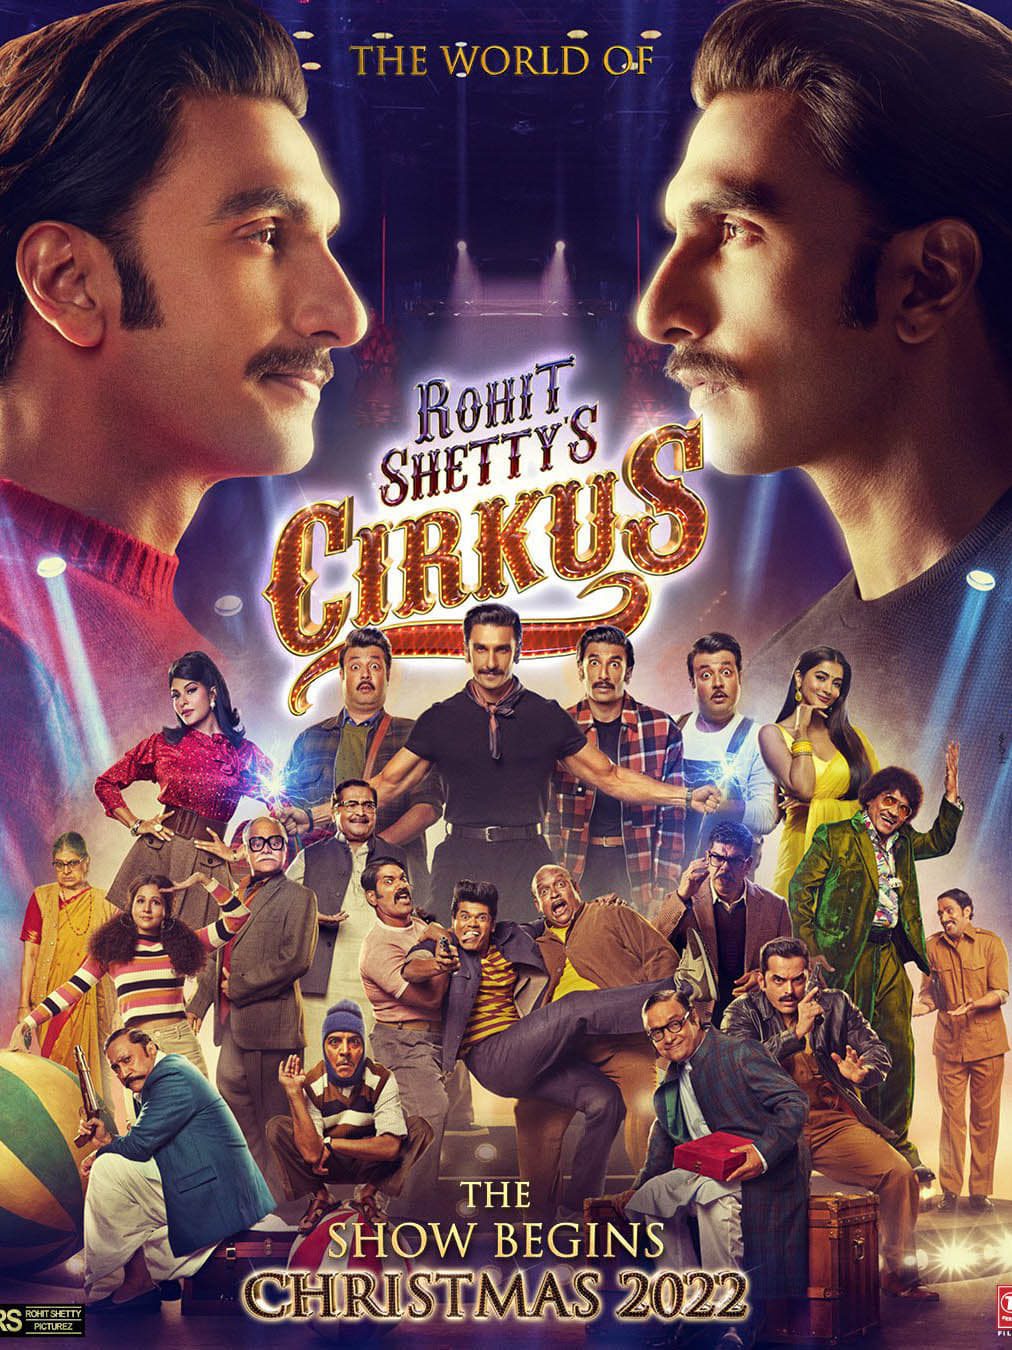 Poster for the movie "Cirkus"